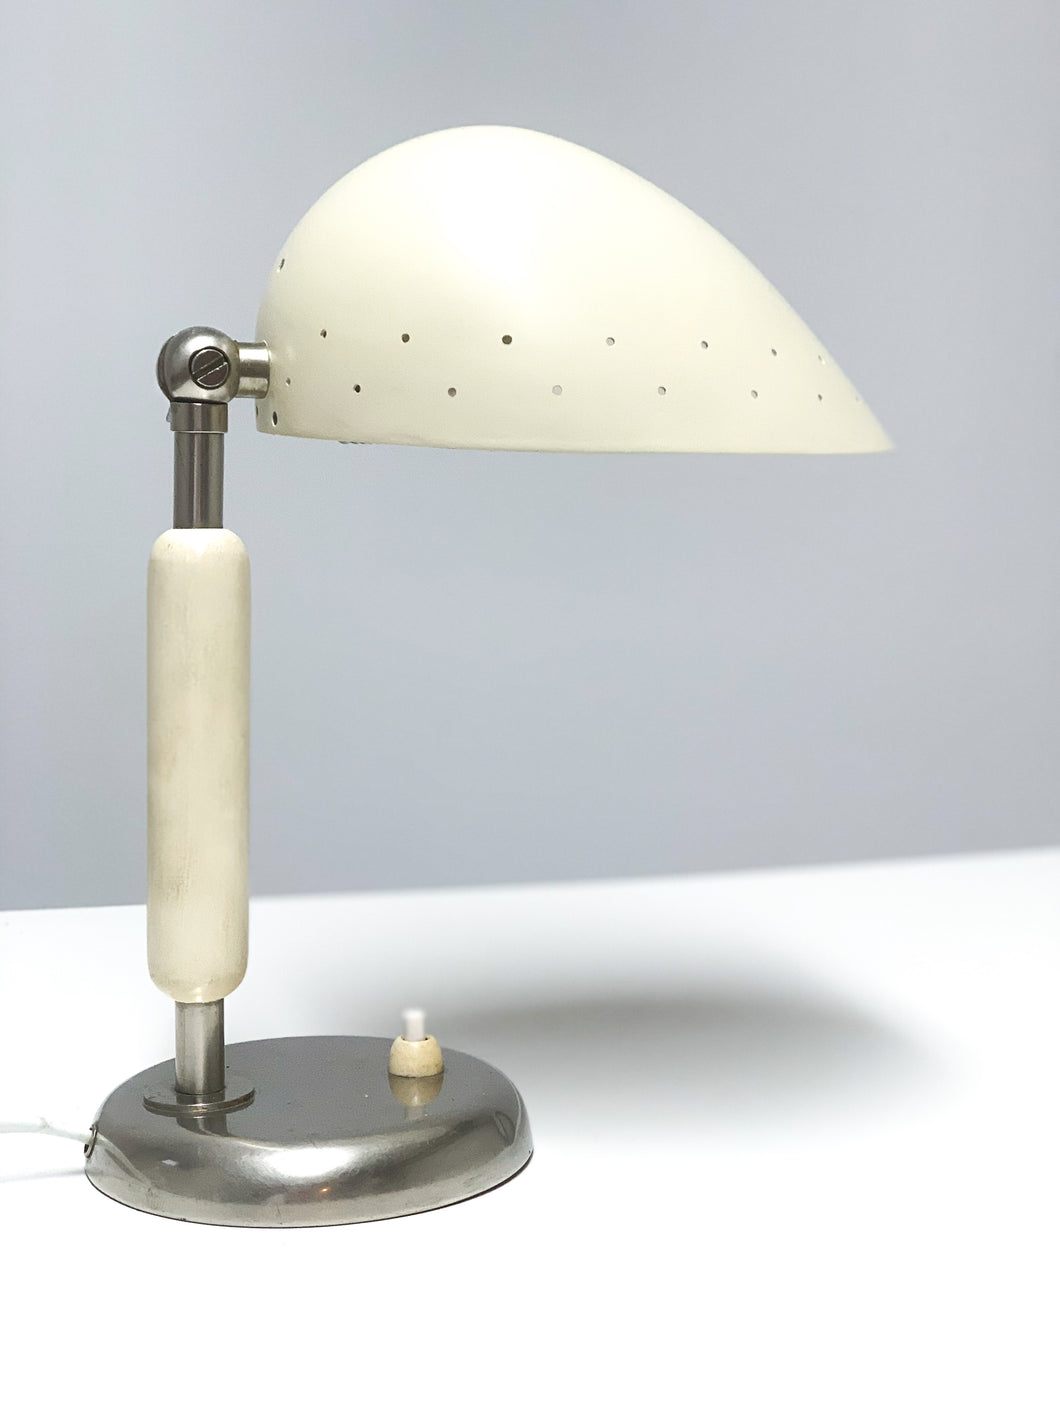 TABLE LAMP BY HARALD NOTINI FOR BÖHLMARKS STOCKHOLM